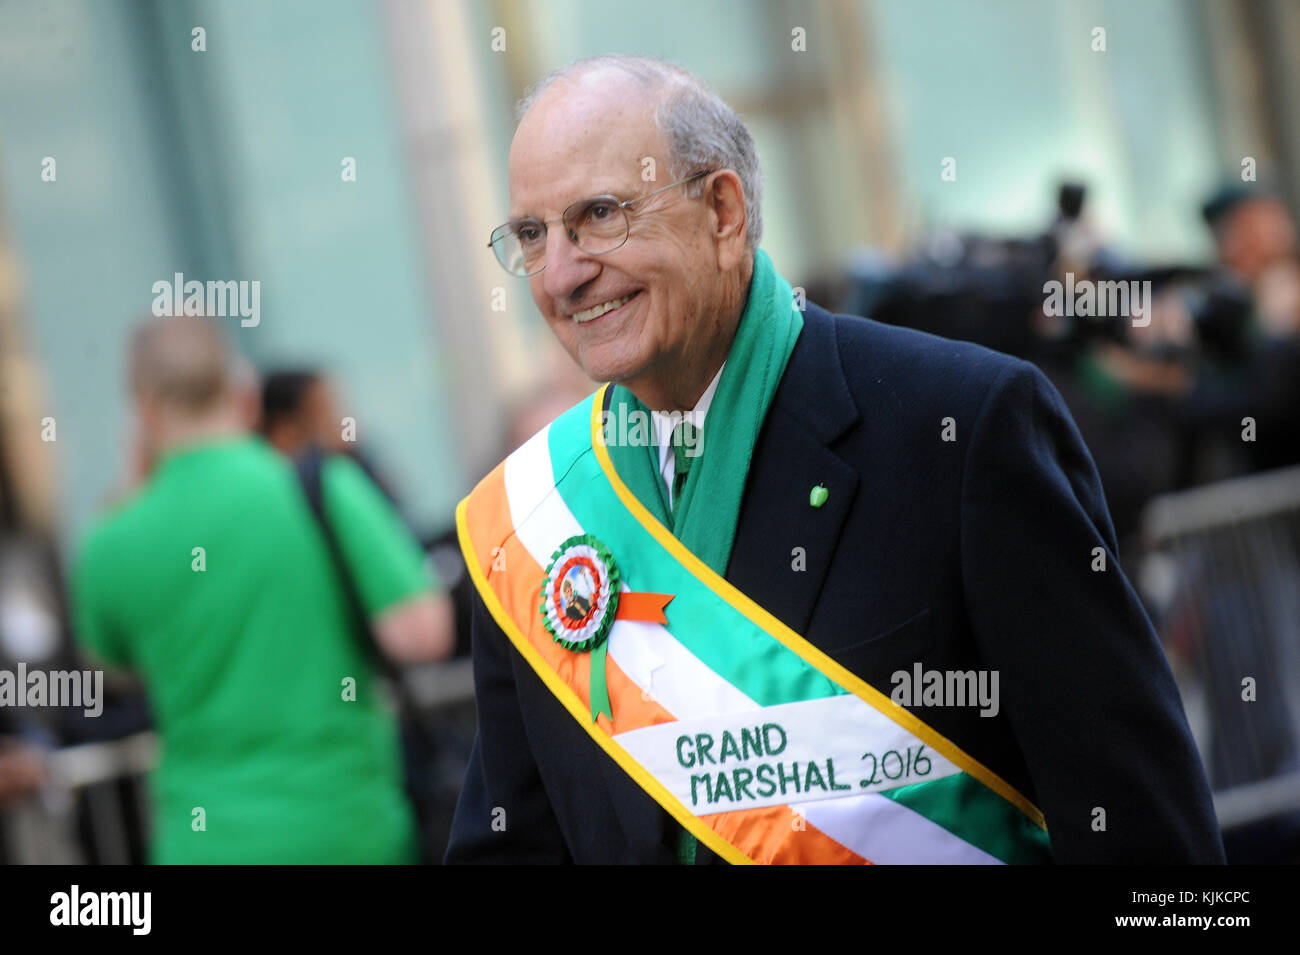 NEW YORK, NY - MARCH 17: Grand Marshal George Mitchell  marches in the annual St. Patrick's Day parade, one of the largest and oldest in the world on March 17, 2016 in New York City. Now that a ban on openly gay groups has been dropped, Mayor de Blasio is attending the parade for the first time since he became mayor in 2014. The parade goes up Fifth Avenue ending at East 79th Street and will draw an estimated 2 million spectators along its 35-block stretch   People:  Grand Marshal George Mitchell Stock Photo